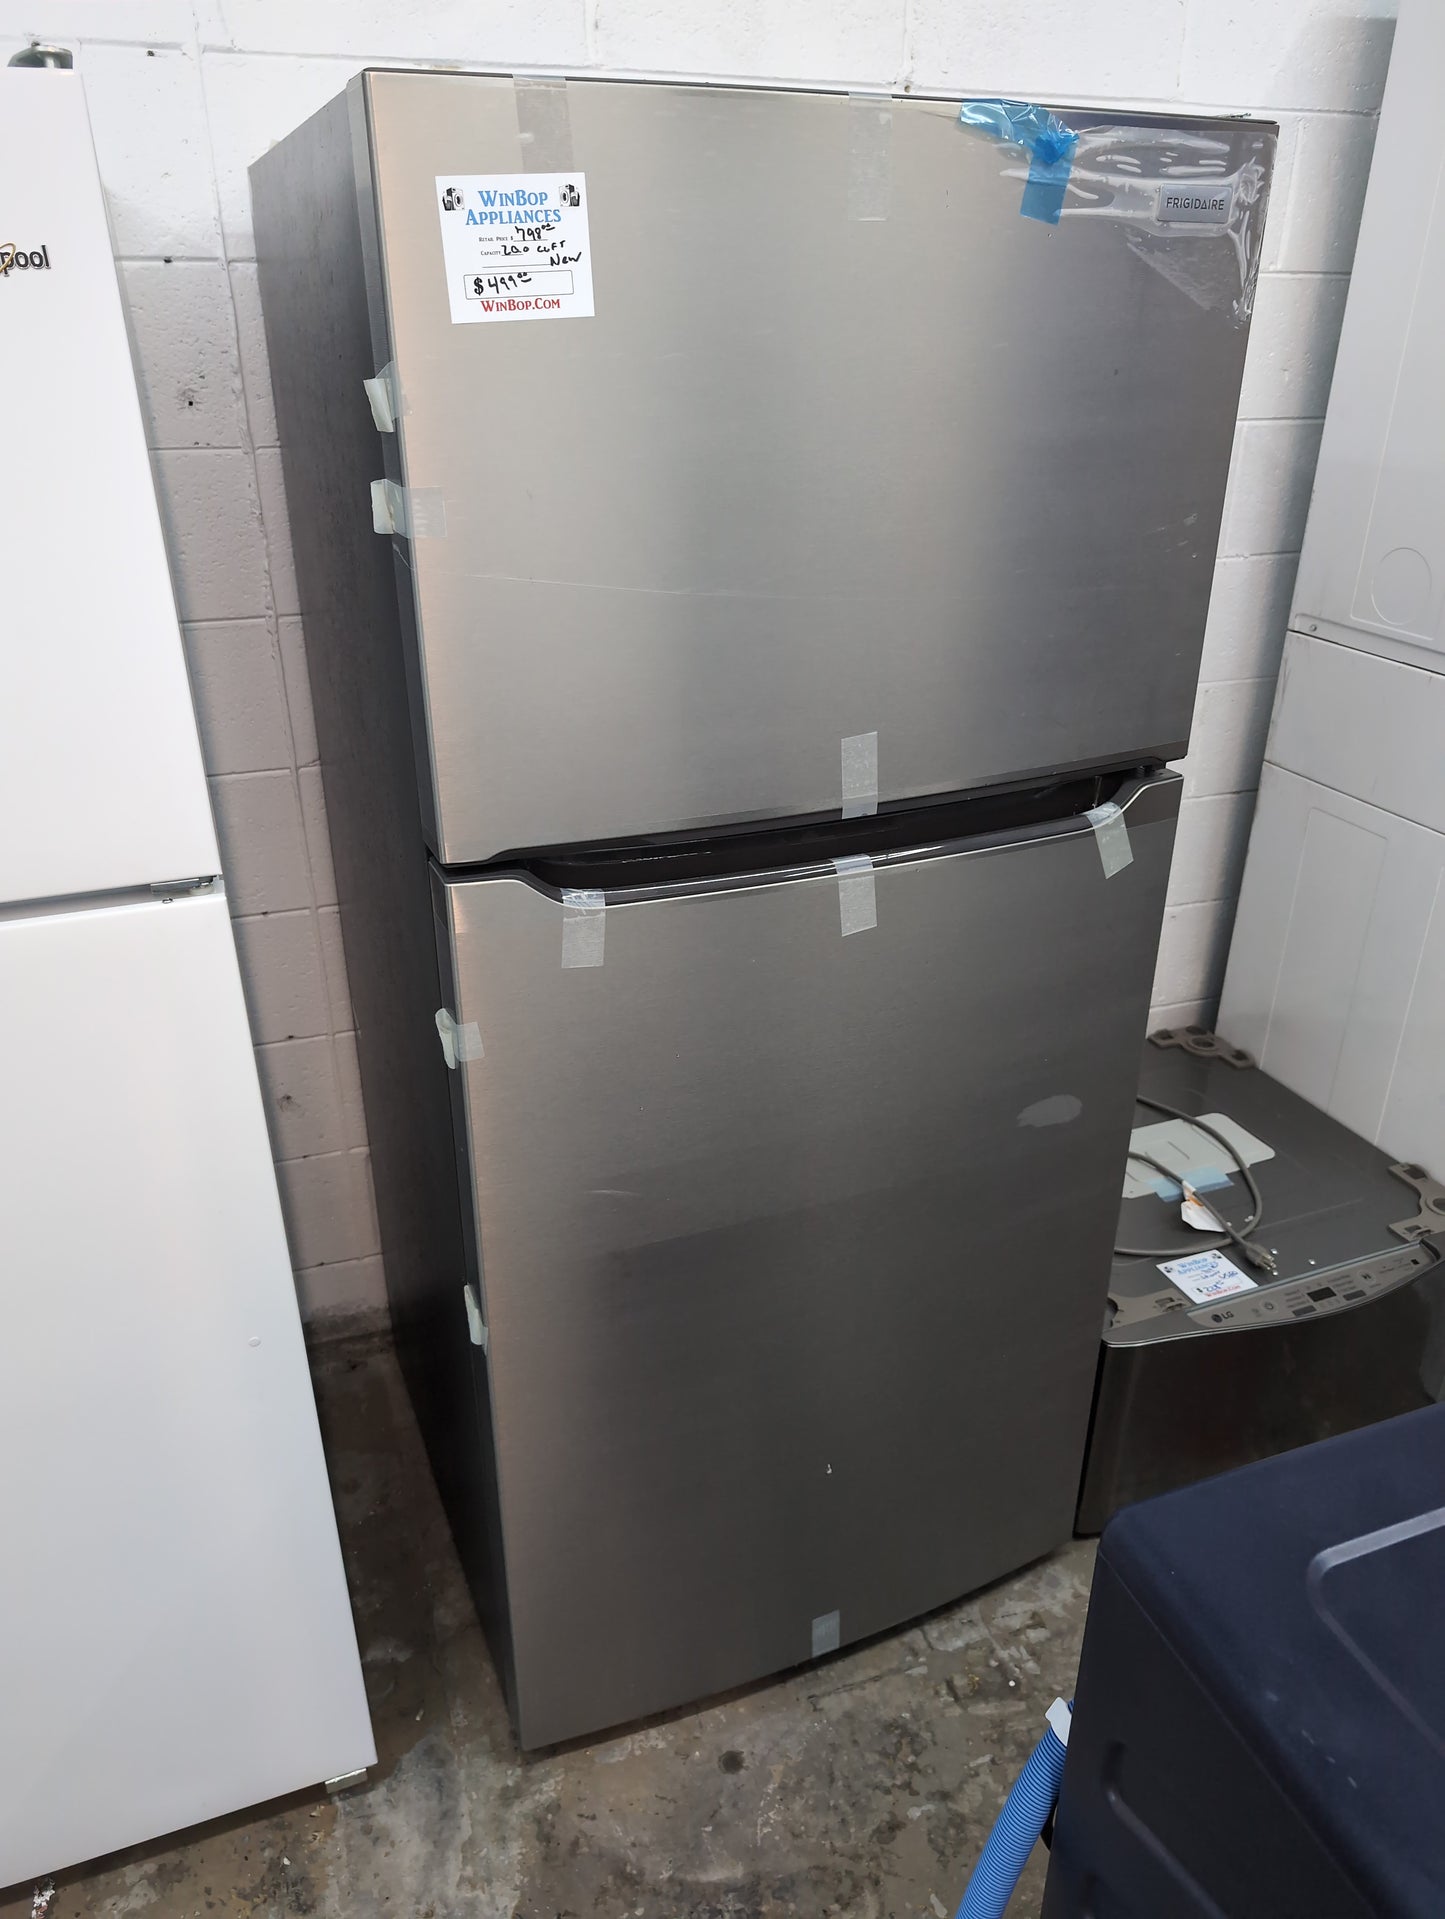 New Frigidaire 20 cubic foot top freezer refrigerator stainless